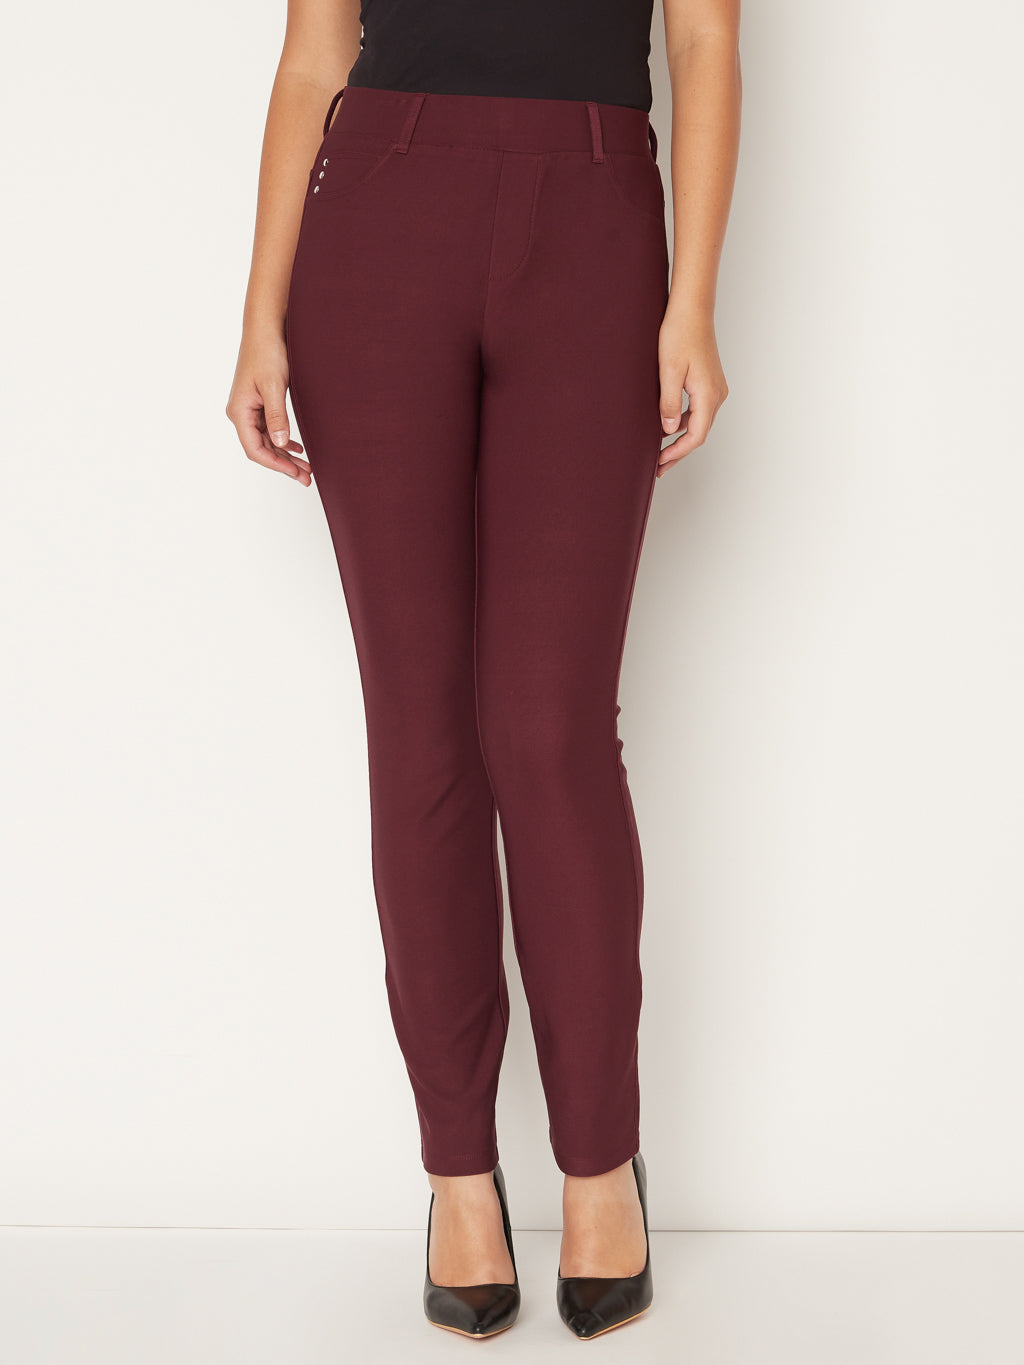 Narrow pull-on ankle pant